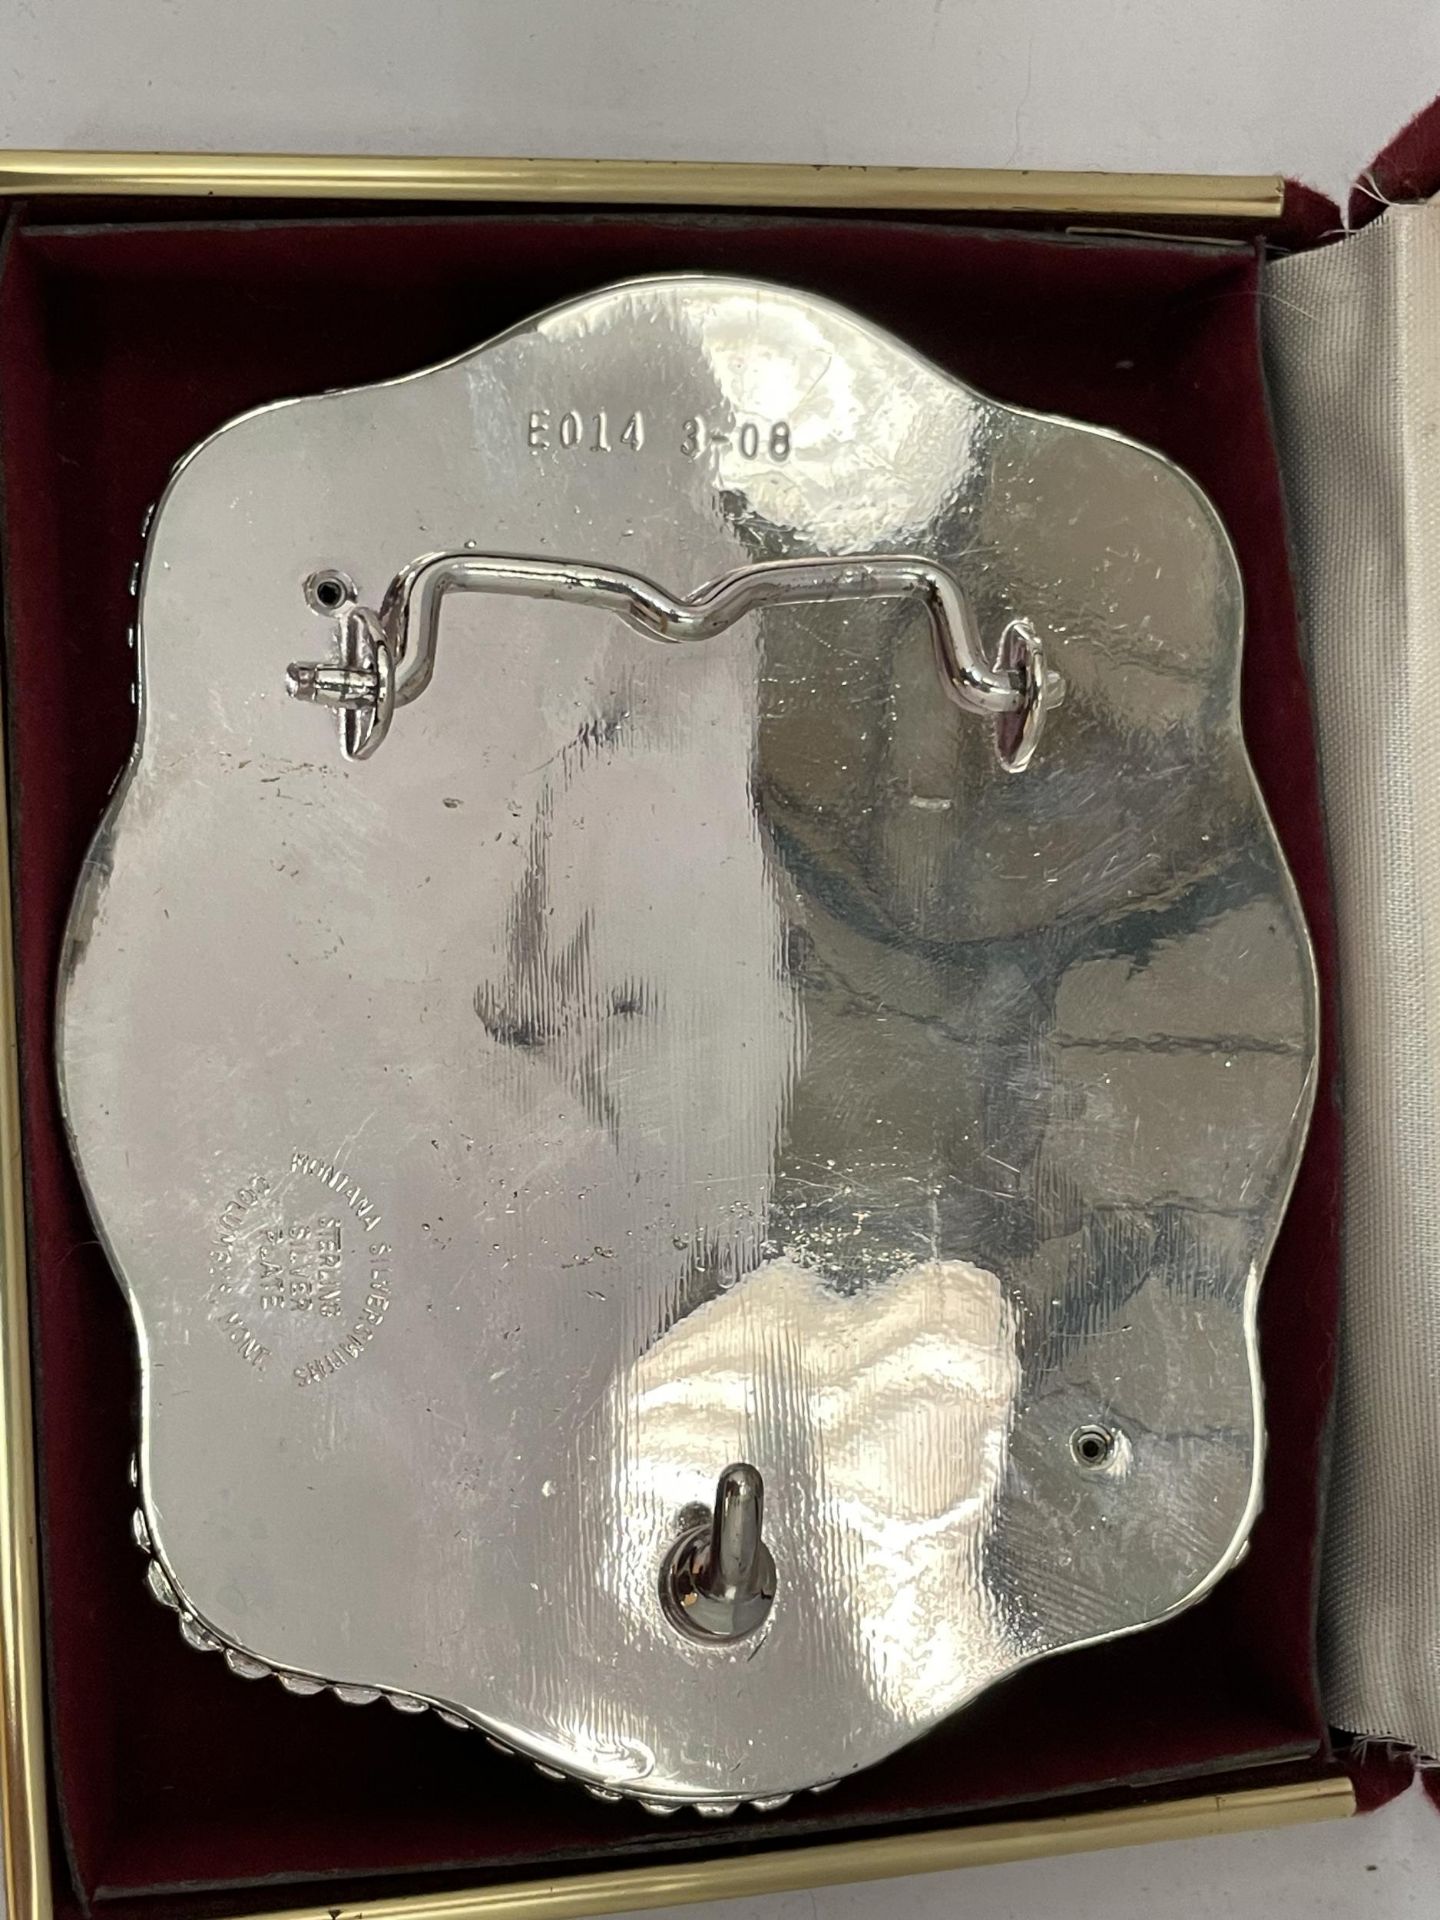 A BOXED STERLING SILVER PLATE AMERICAN BELT BUCKLE, STAMPED WITH MONTANA SILVER SMITHS MAKERS MARK - Image 3 of 4